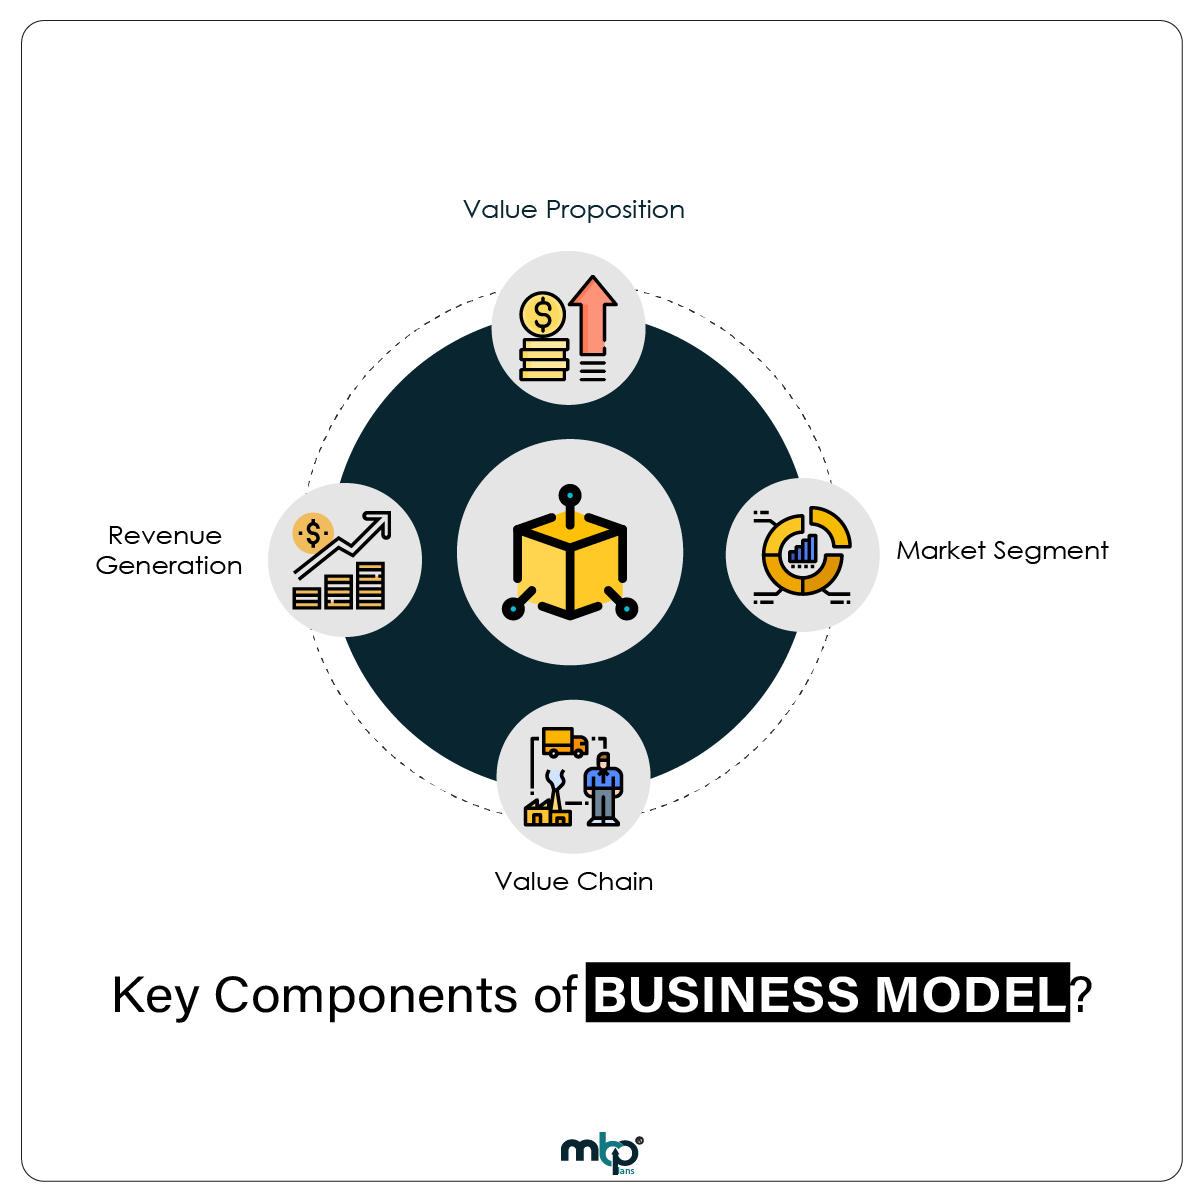 4 major components of business model